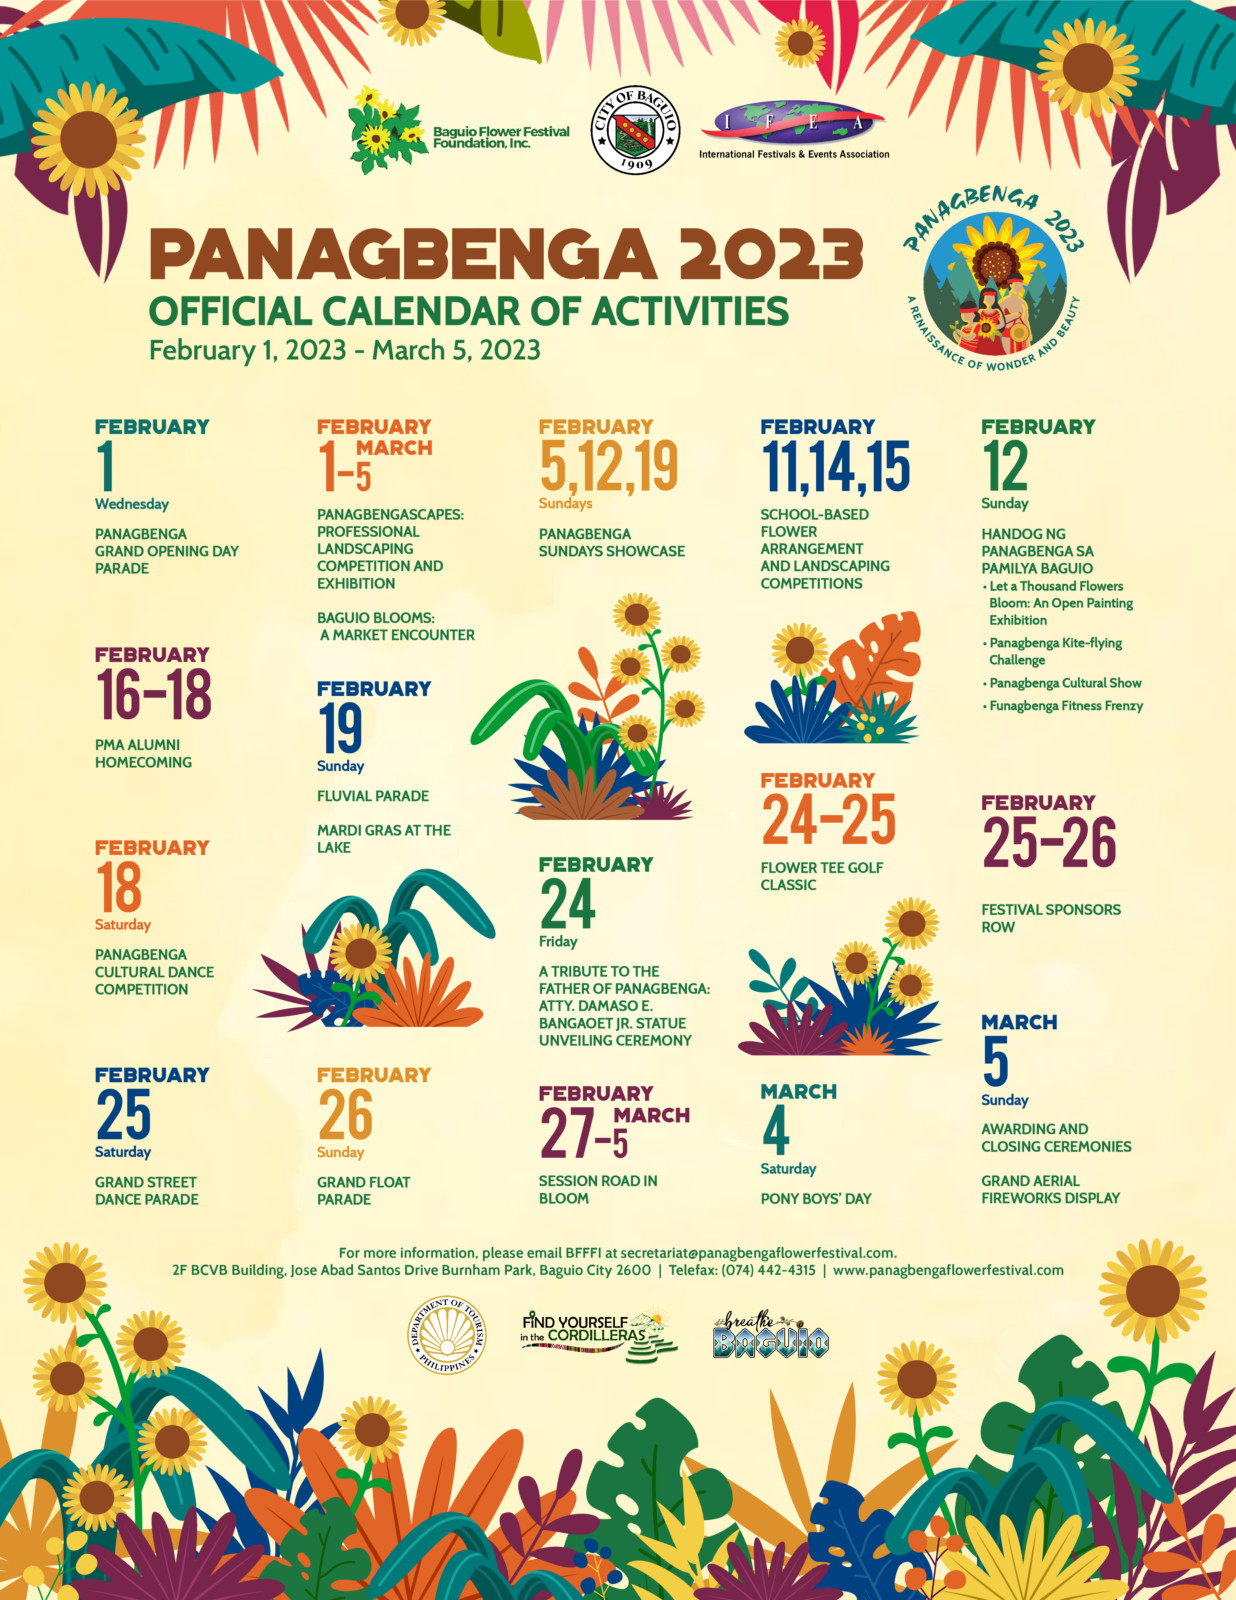 PANAGBENGA FESTIVAL 2023 IN BAGUIO Schedule of Activities, Things to